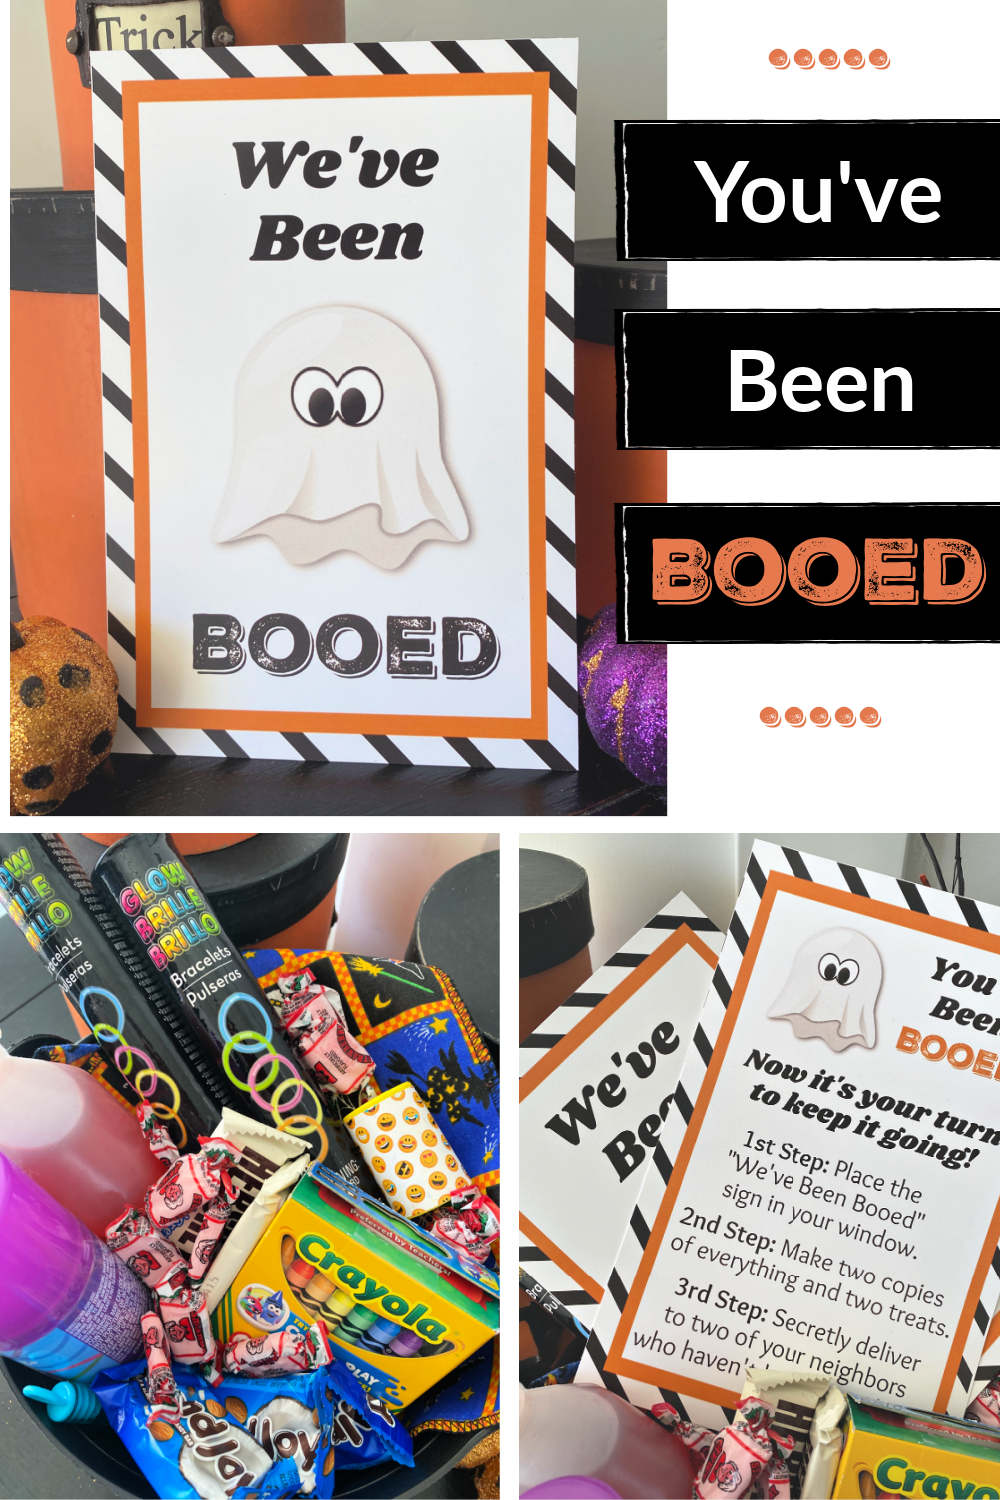 You've Been Booed Free Printables. Get these printables and start the "boo" in your neighborhood. #youvebeenbooed #youvebeenbooedprintable #funhalloween